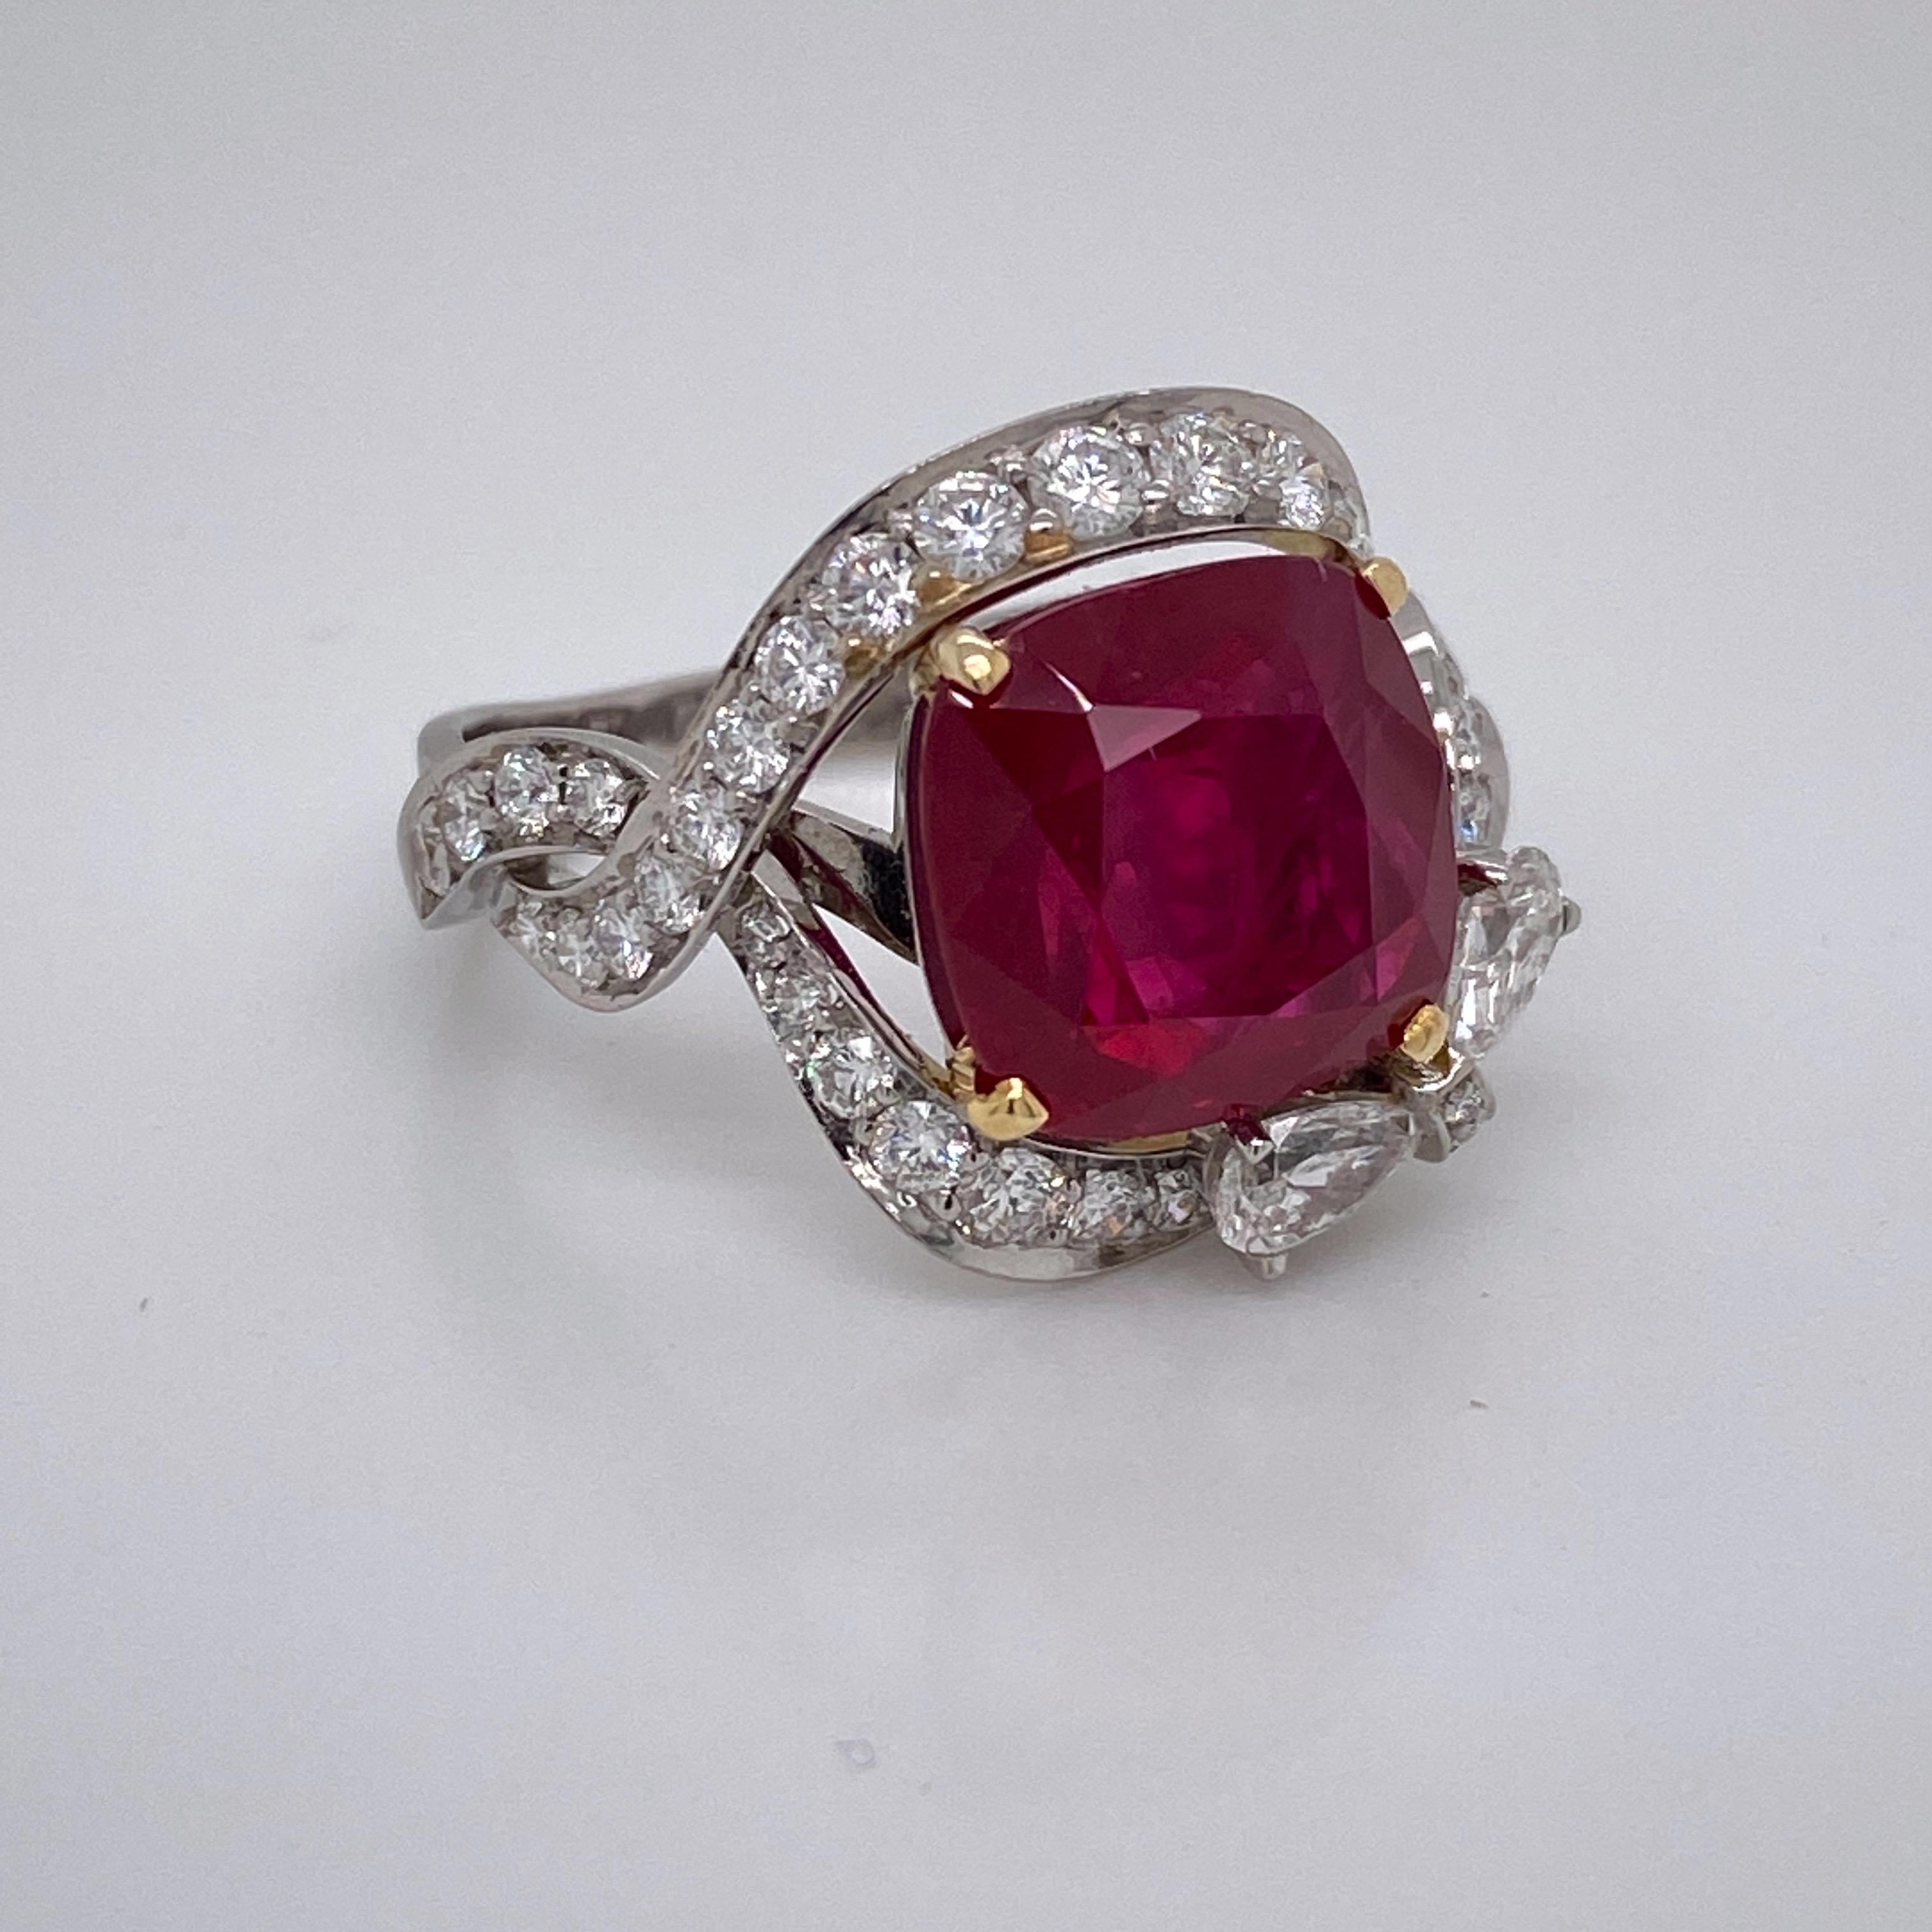 From the Emilio Jewelry Vault, Showcasing a stunning 6.50 carat center Grs Certified as Vivid Red/Pigeons blood. The best color grading possible for a ruby. Burmese rubies of this size are hard to get a hold of, specially with such a color. The ruby